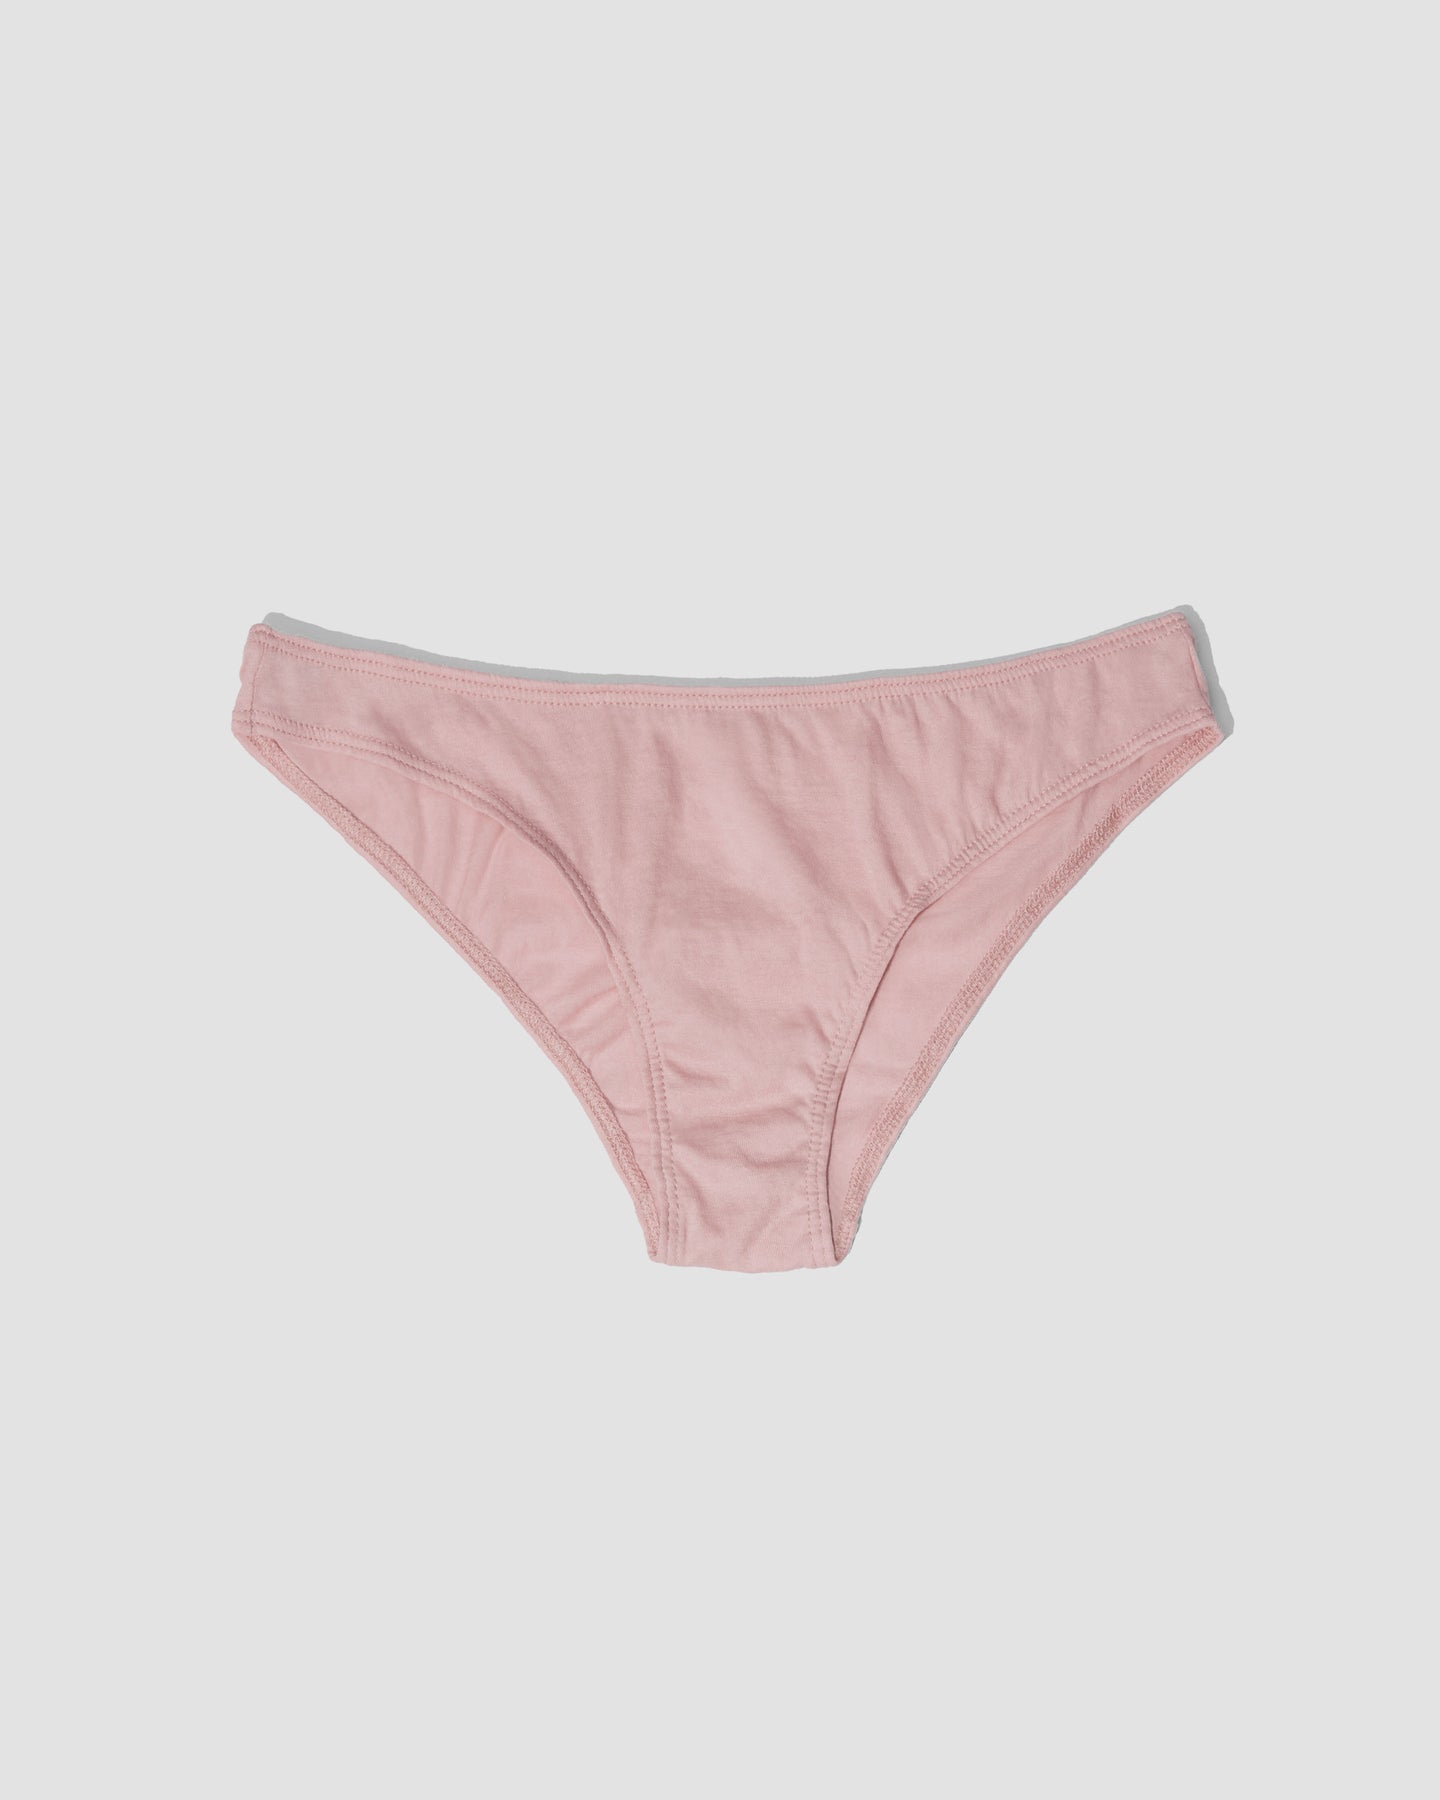 Aerie's Super Comfy Undies You'll Wanna Sit Around In All Day Are On Sale